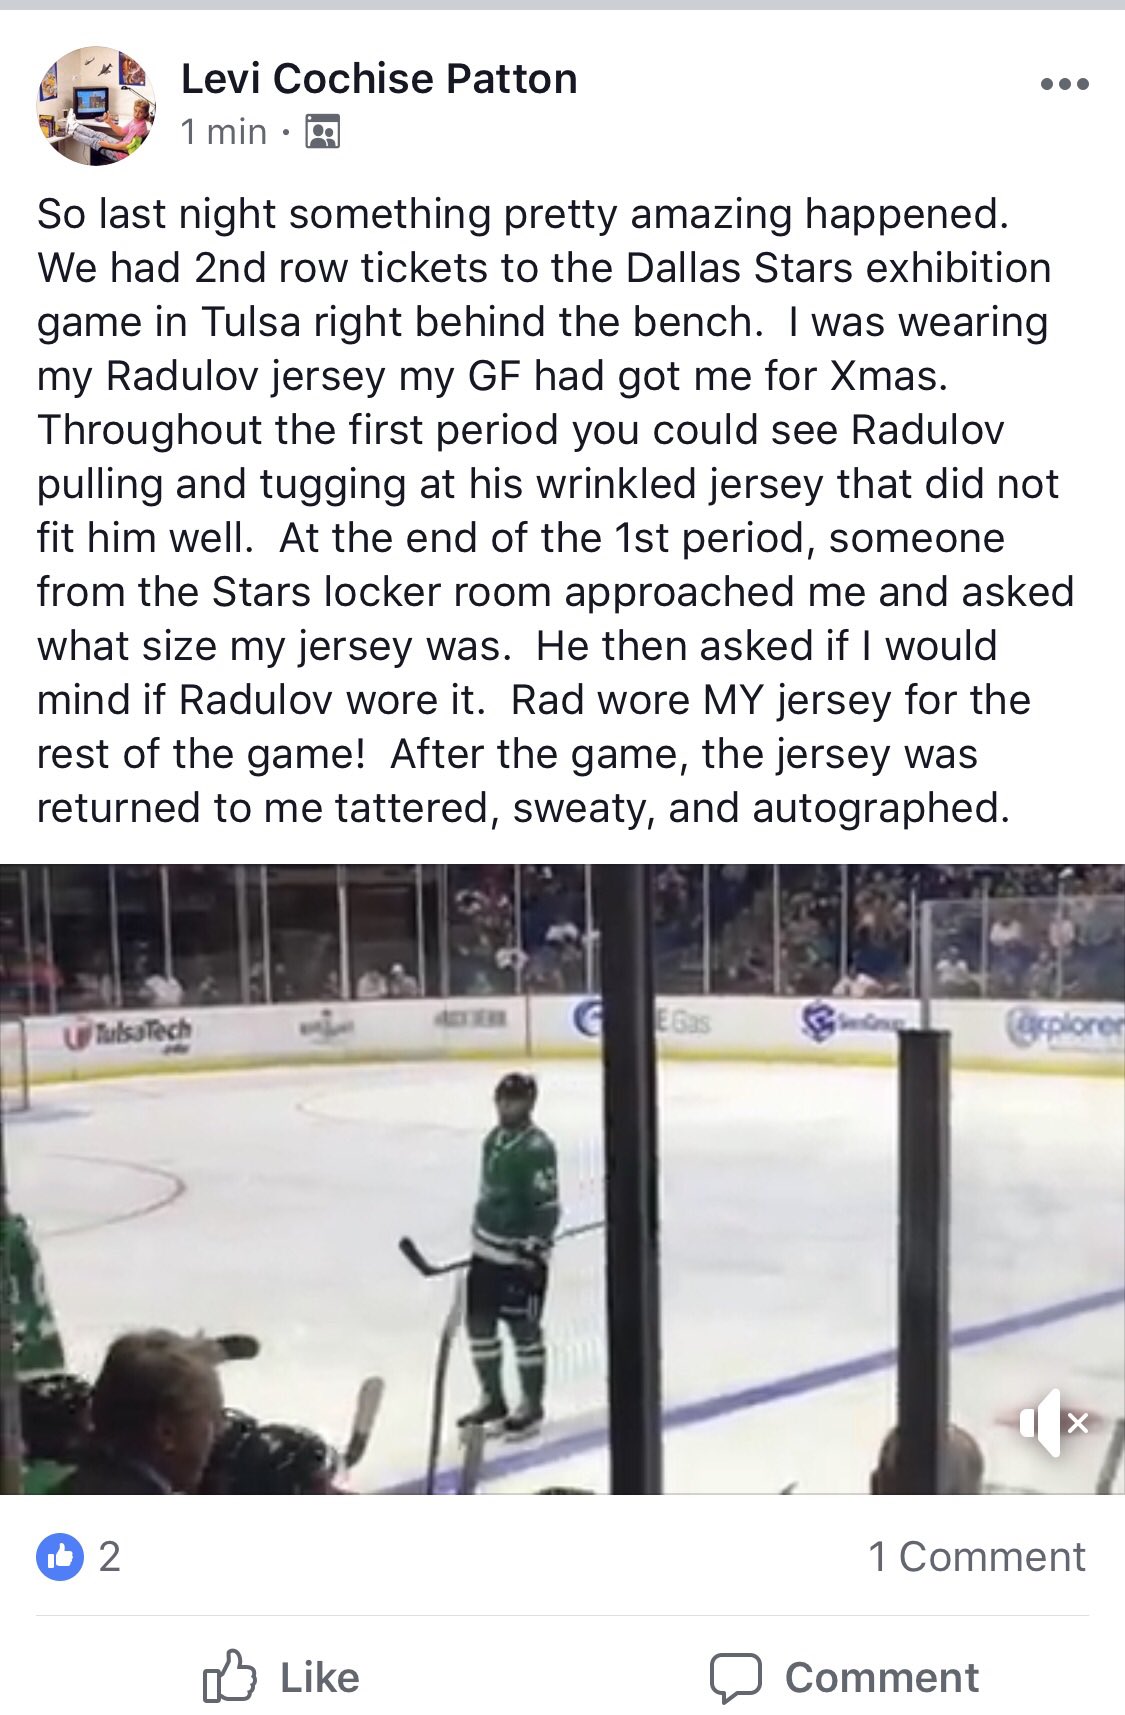 Jeffrey Kahn on X: So this is actually pretty cool. @DallasStars player  Alexander Radulov had a terrible, crumpled jersey during one of the games.  Someone from the Stars locker room approached a